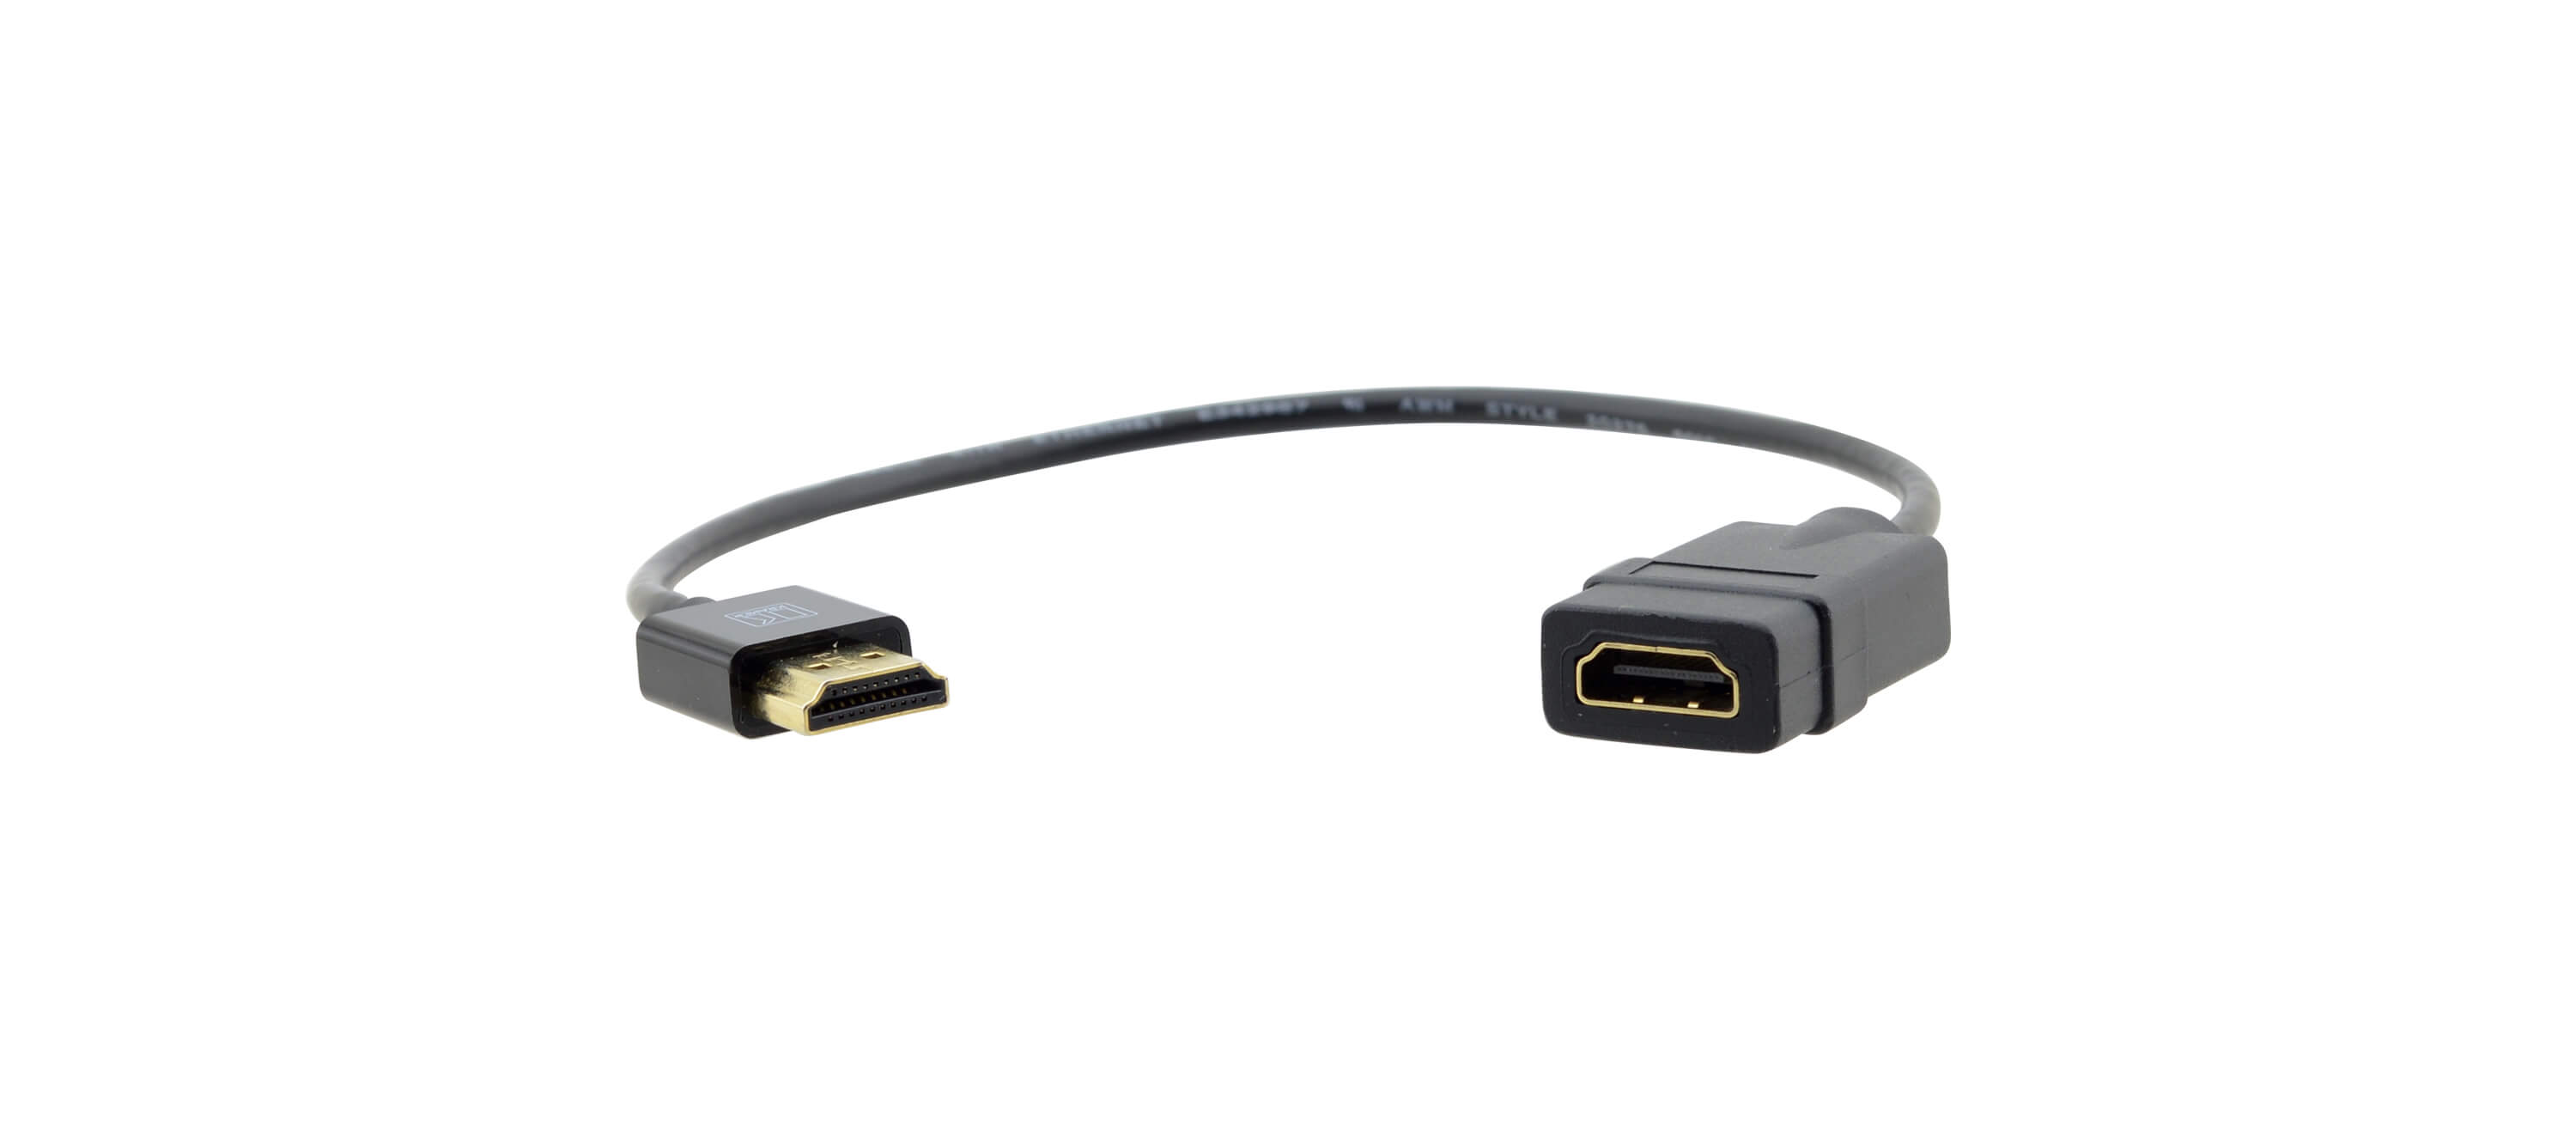 ADC-HM/HF/PICO Ultra–Slim High–Speed HDMI Flexible Adapter Cable with Ethernet